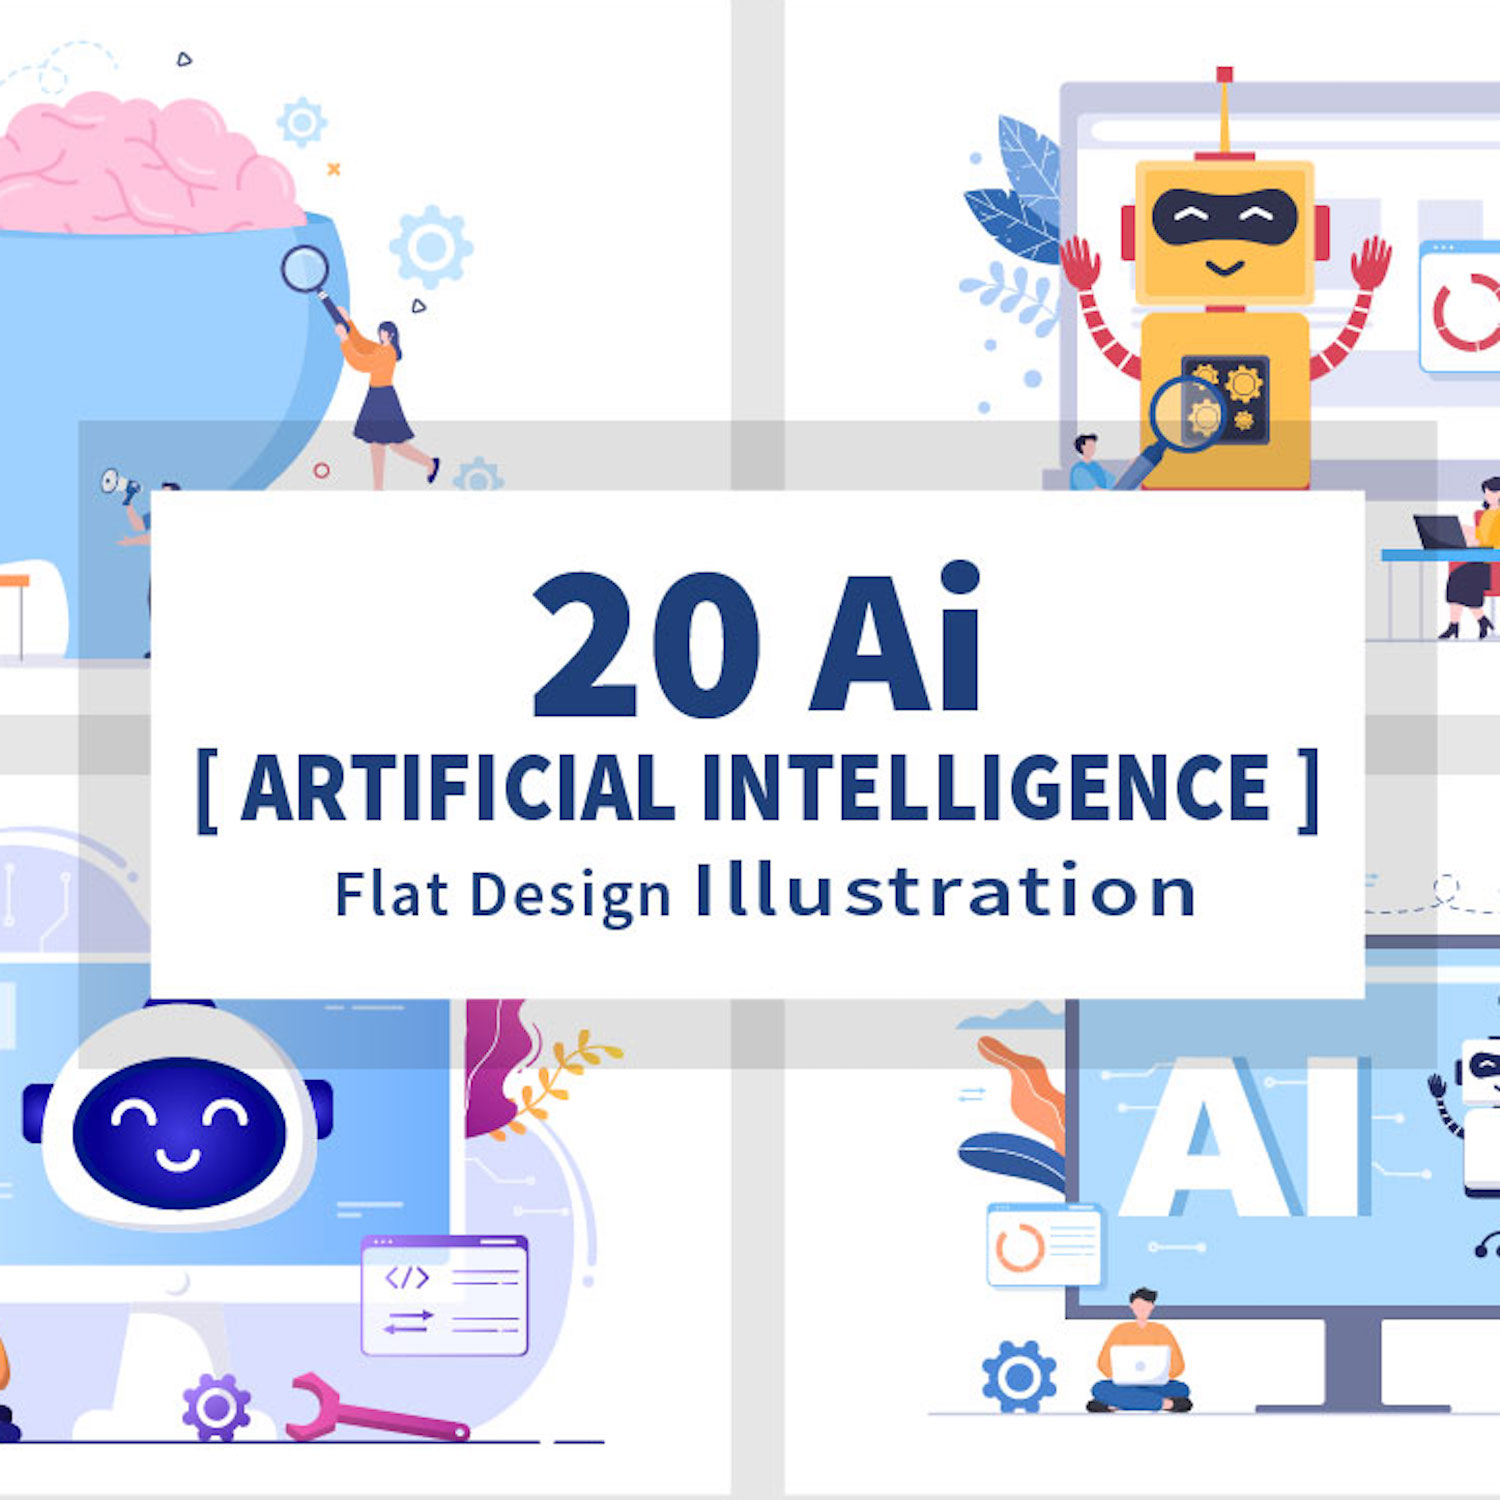 20 Artificial Intelligence Digital Brain Technology Vector Illustrations cover image.